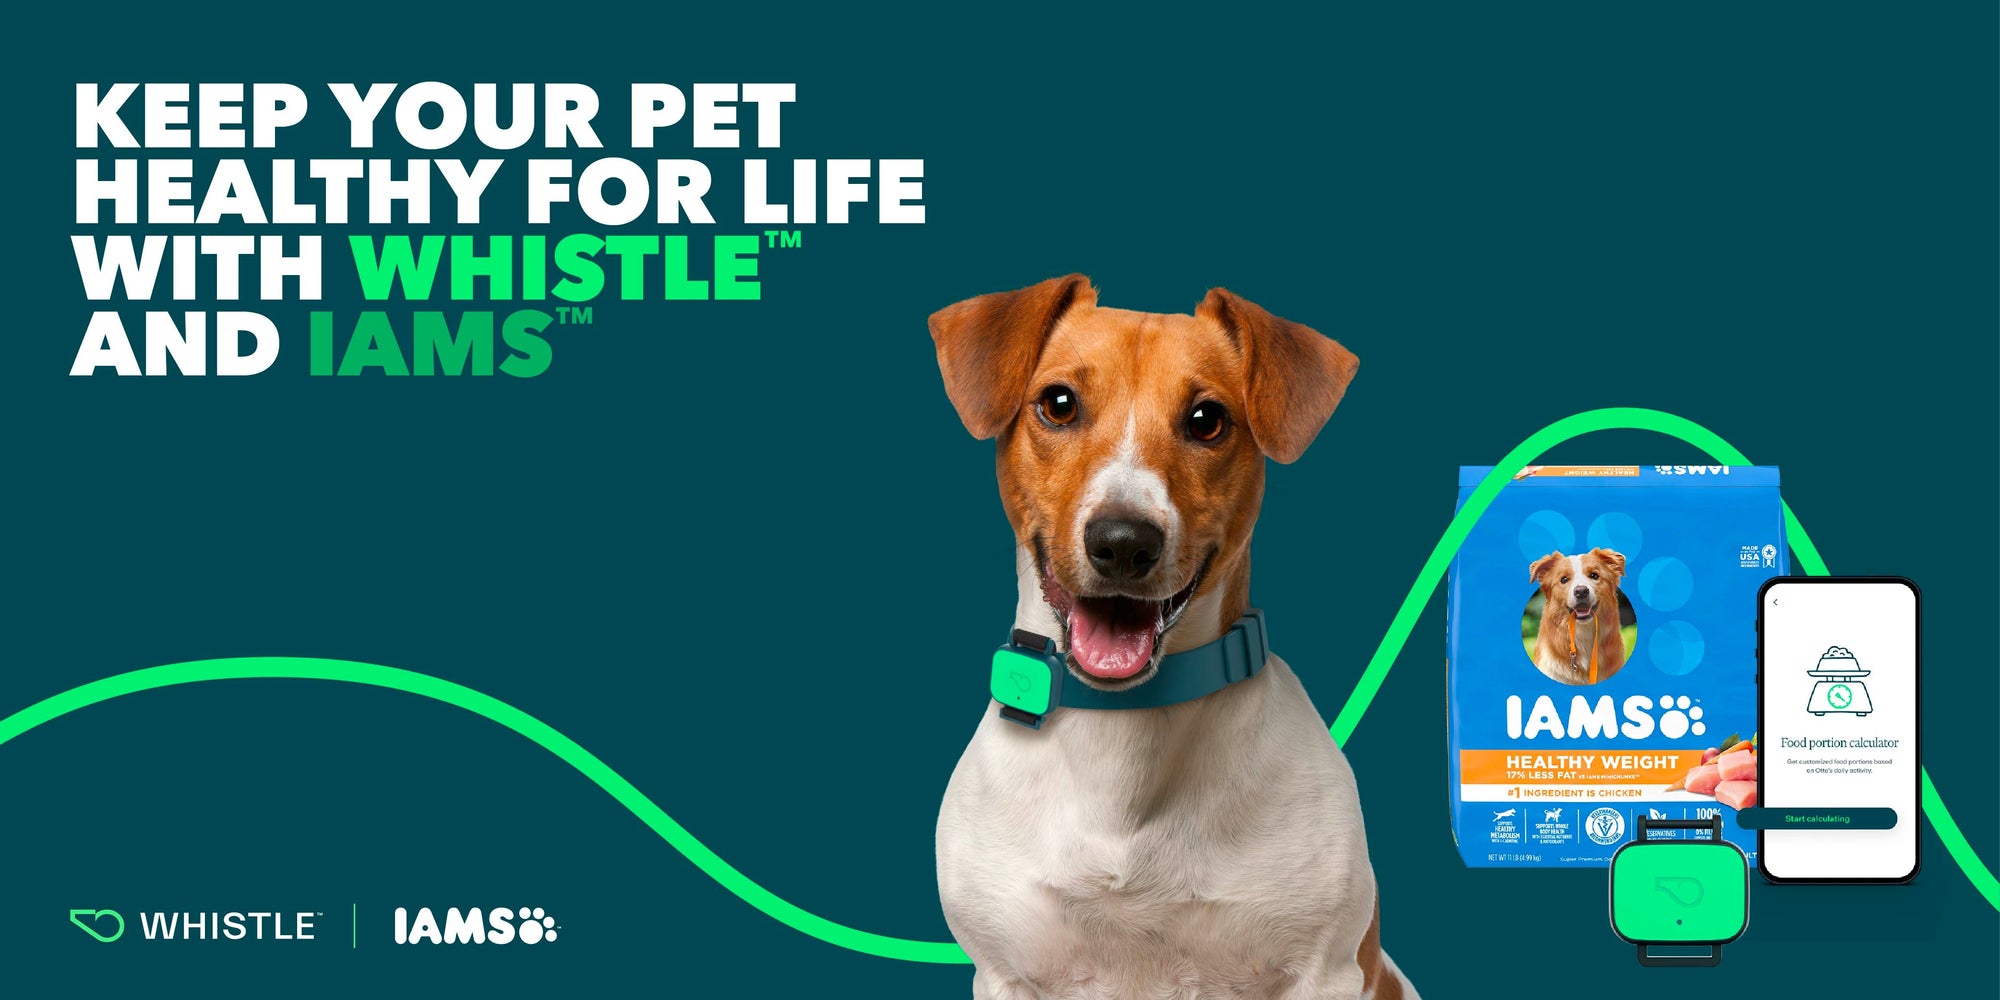 Keep your pet healthy for life with Whistle™ and Iams™ - Whistle